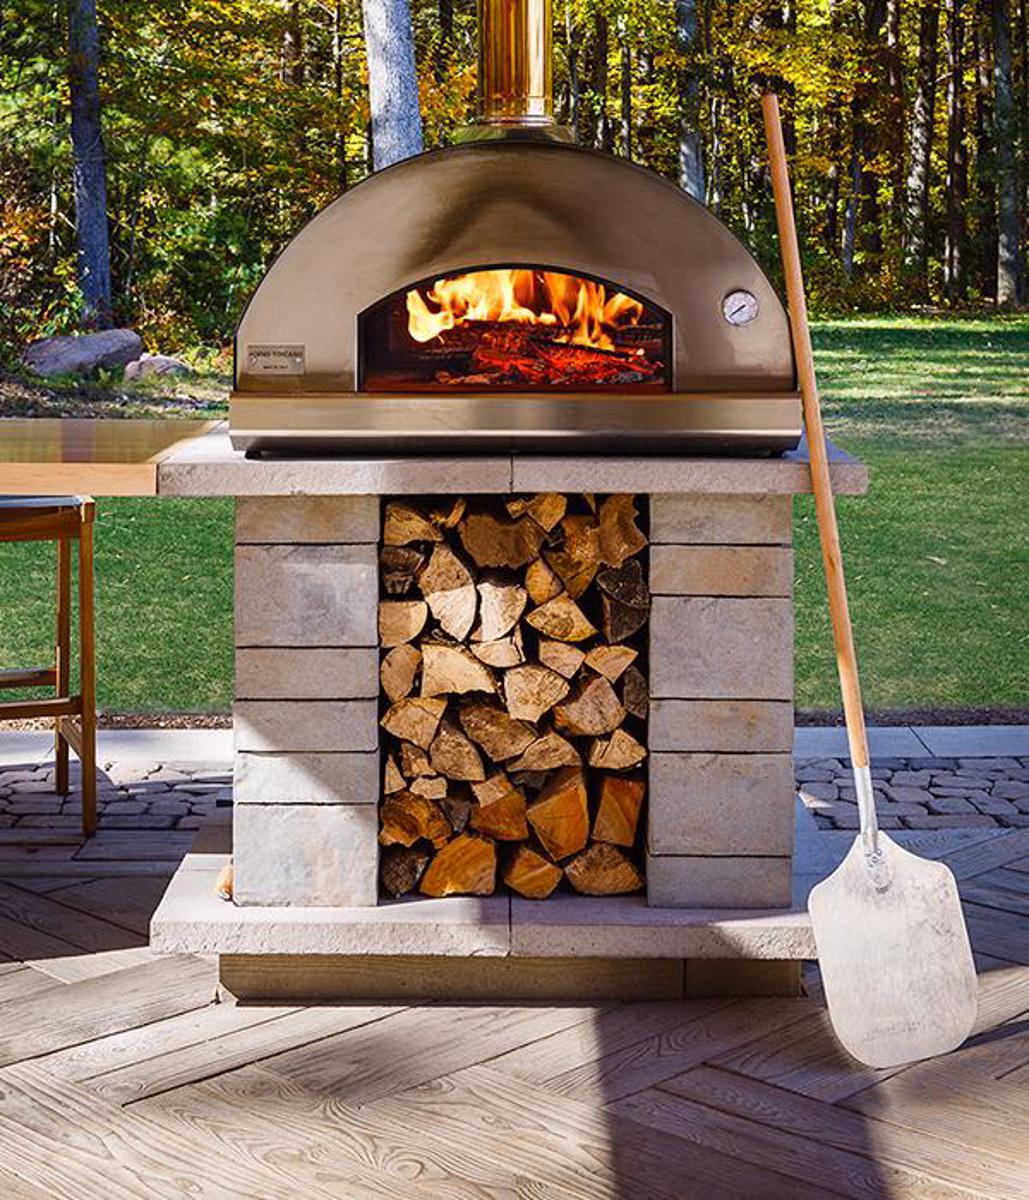 Techo bloc by space outdoor kitchens backyard pizza oven walls grey 4